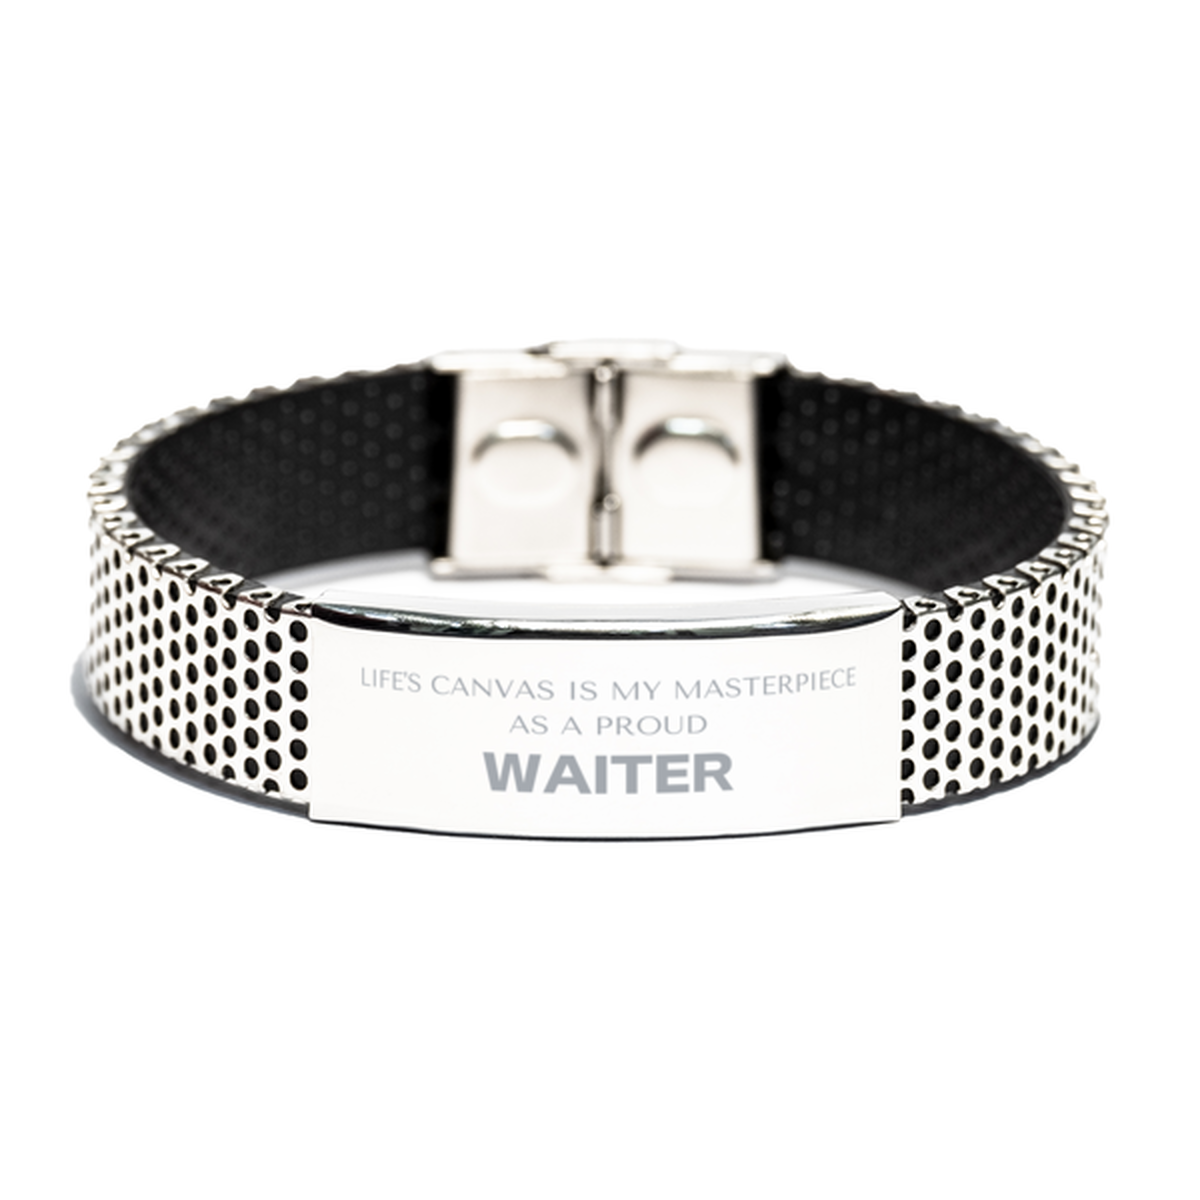 Proud Waiter Gifts, Life's canvas is my masterpiece, Epic Birthday Christmas Unique Stainless Steel Bracelet For Waiter, Coworkers, Men, Women, Friends